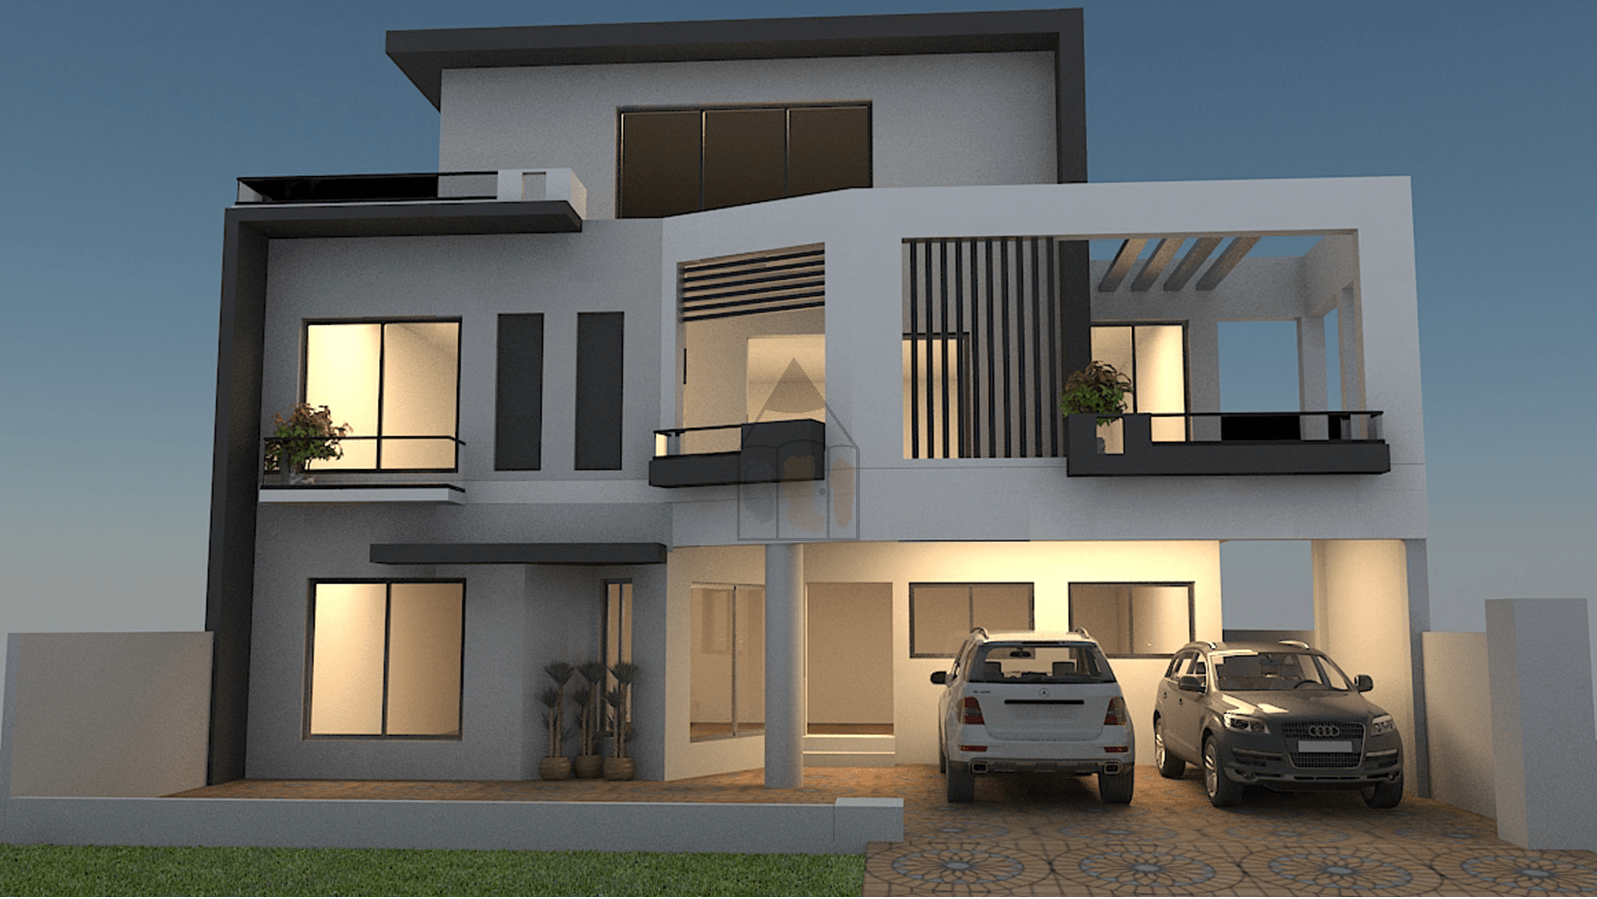 12 marla house plan. 12 Marla house has complete layout plan with front elevation is a double storey house having 5 bedrooms with 5 attached bathrooms, where 2 bedrooms are…